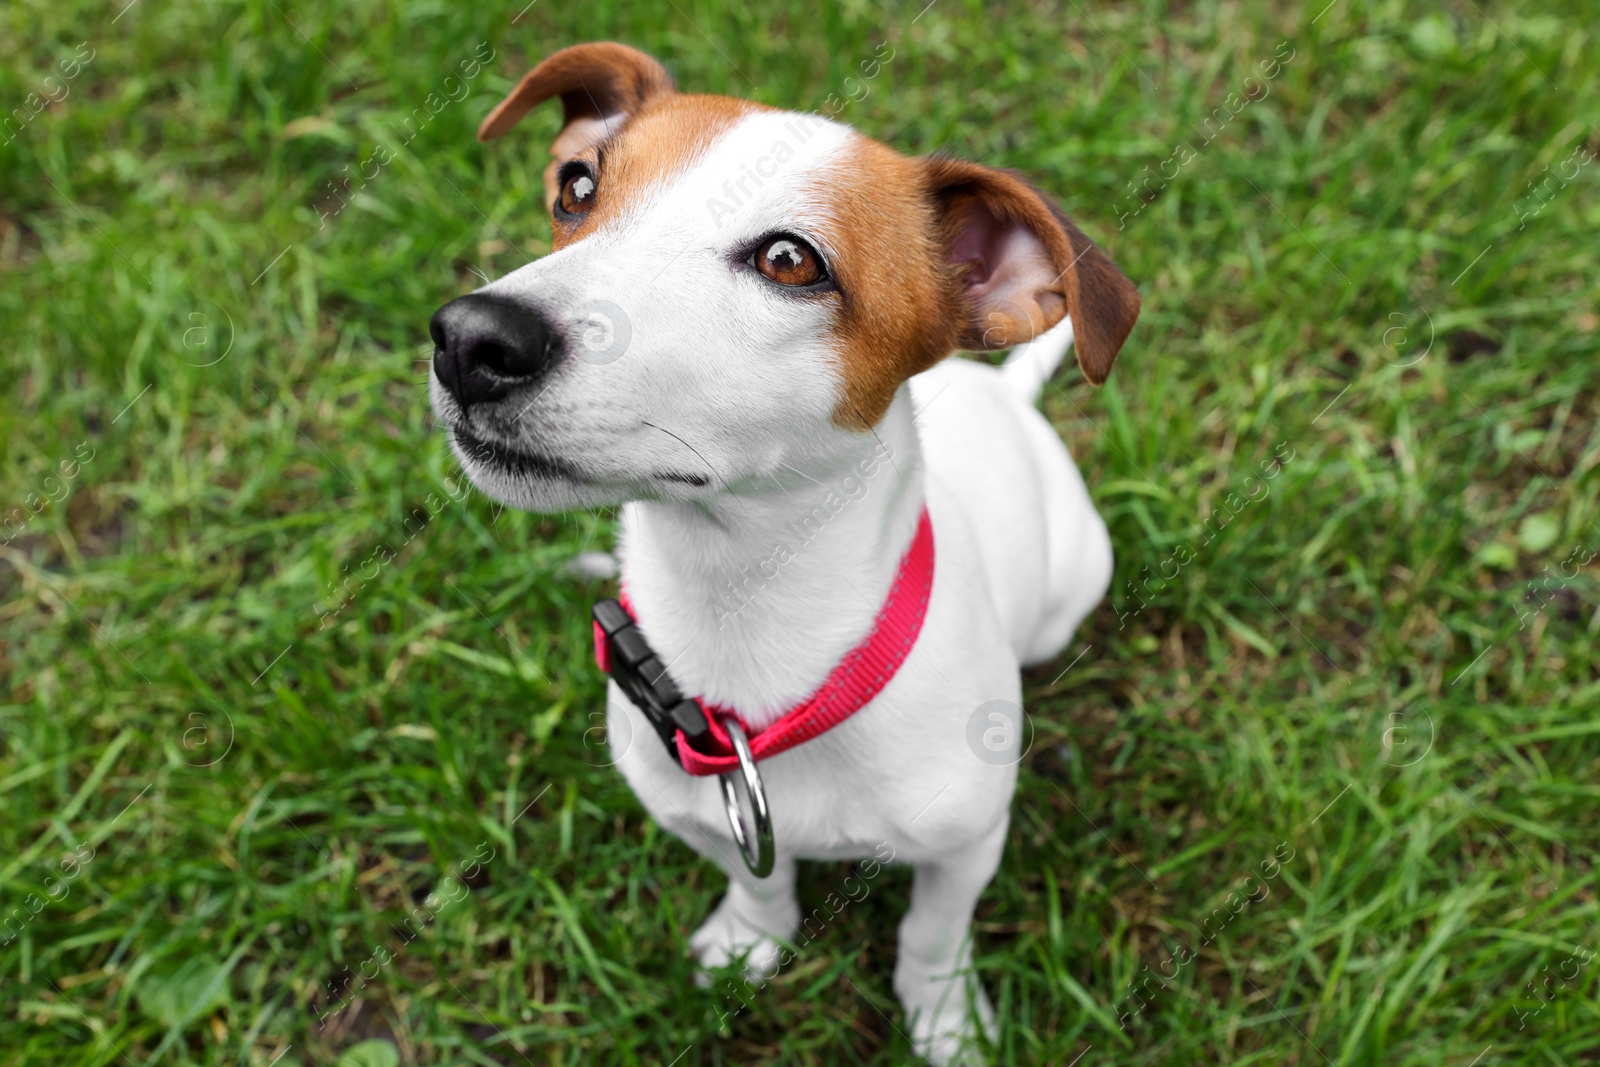 Photo of Beautiful Jack Russell Terrier in red dog collar outdoors